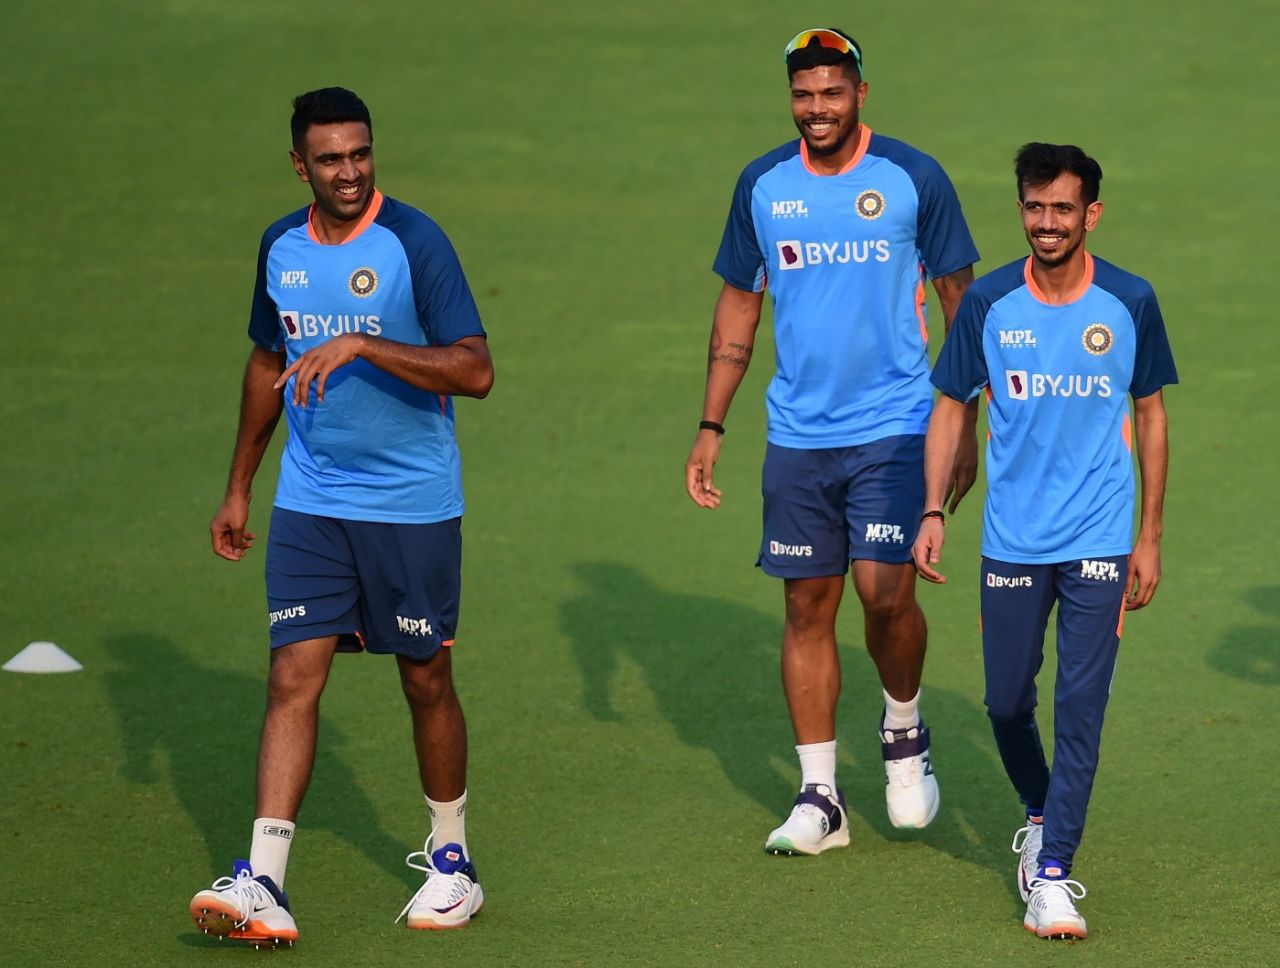 India Playing XI 2nd T20: Jasprit Bumrah set to RETURN, Umesh Yadav unlikely for 2nd T20, Follow IND vs AUS LIVE, India vs Australia LIVE, IND vs AUS 2nd T20